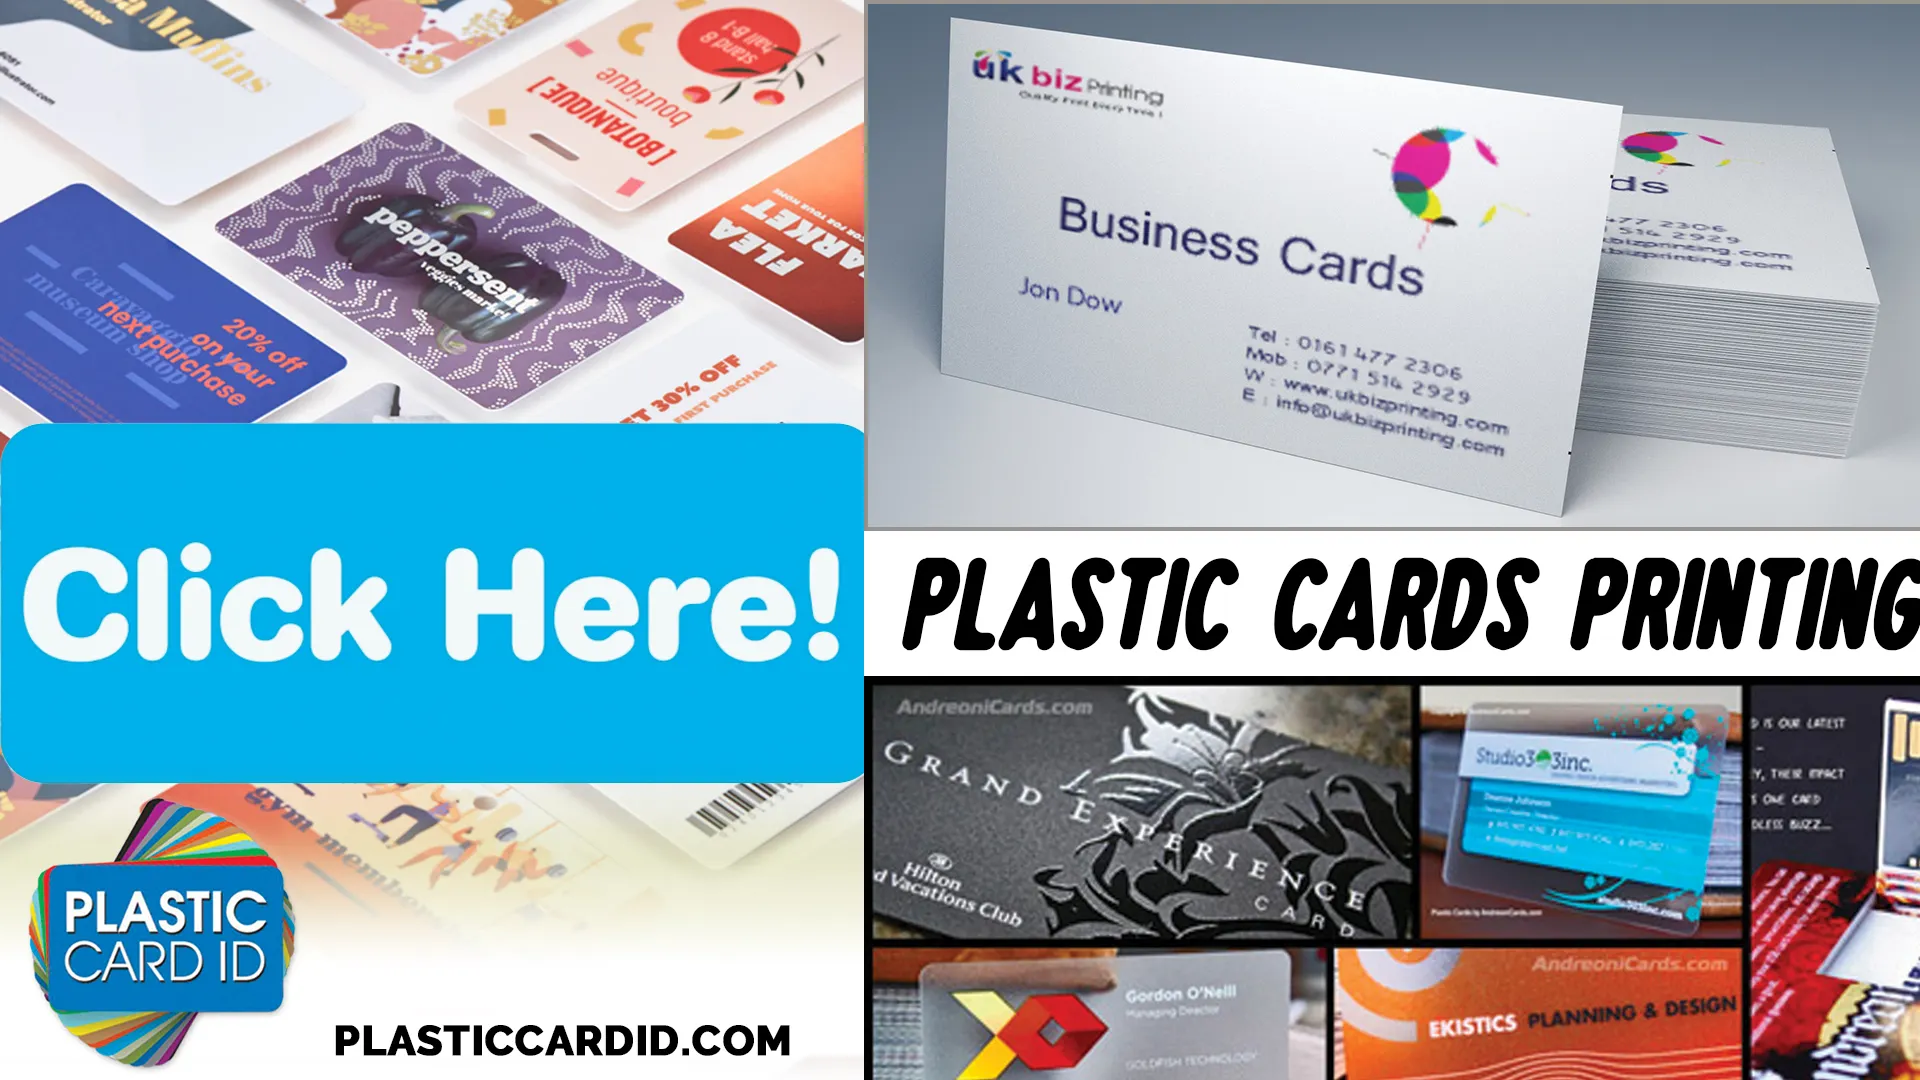 Enhancing Your Brand with PlasticCardID.com